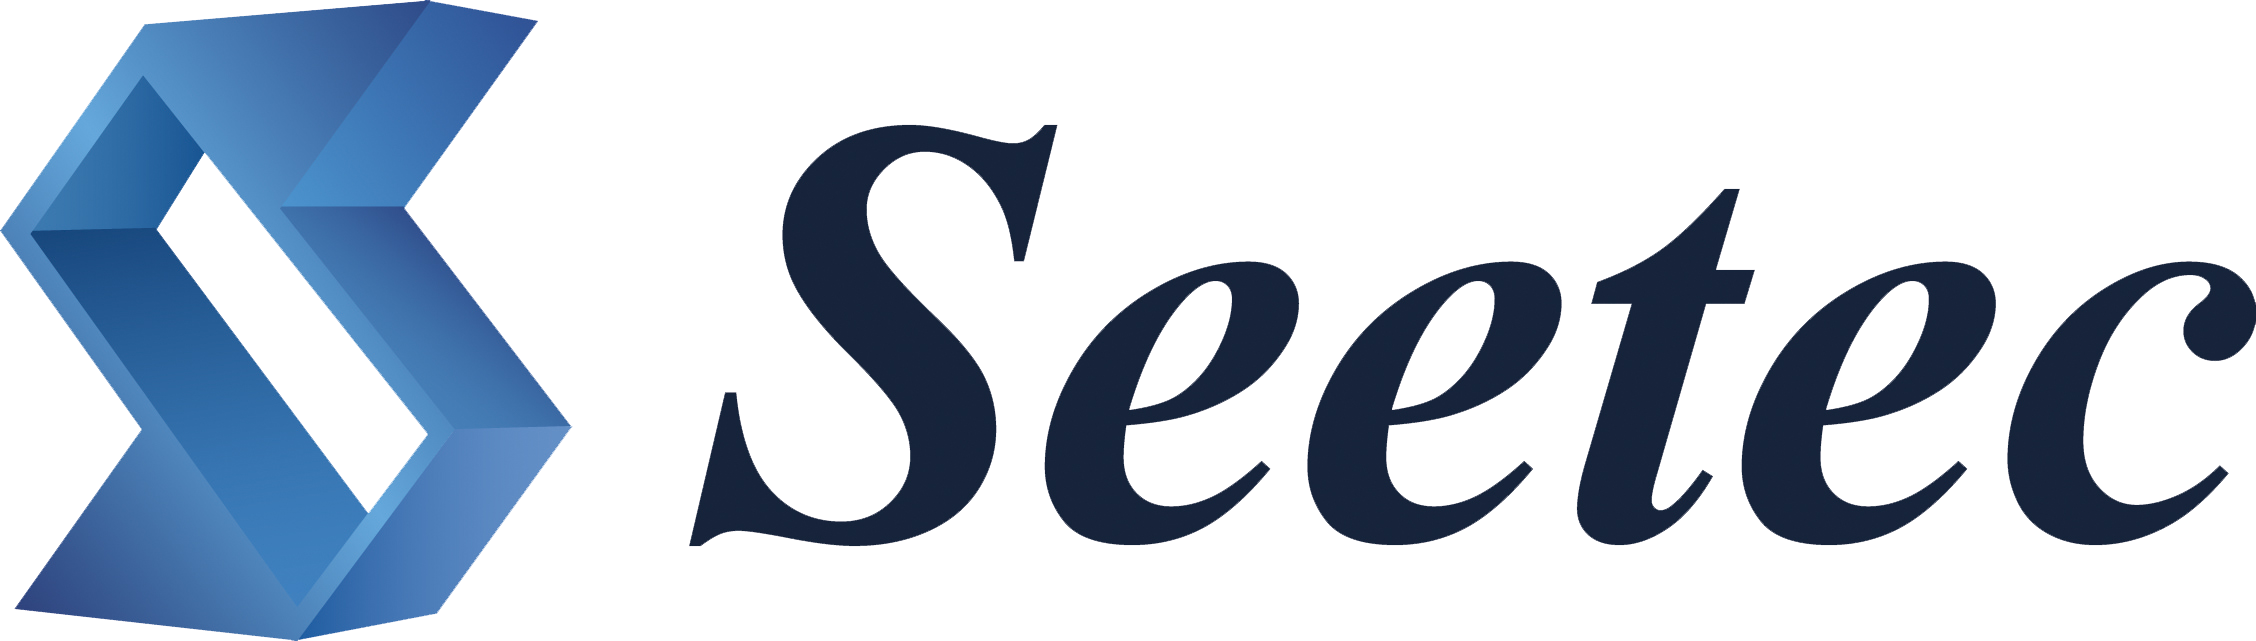 Seetec Online Learning and Resources